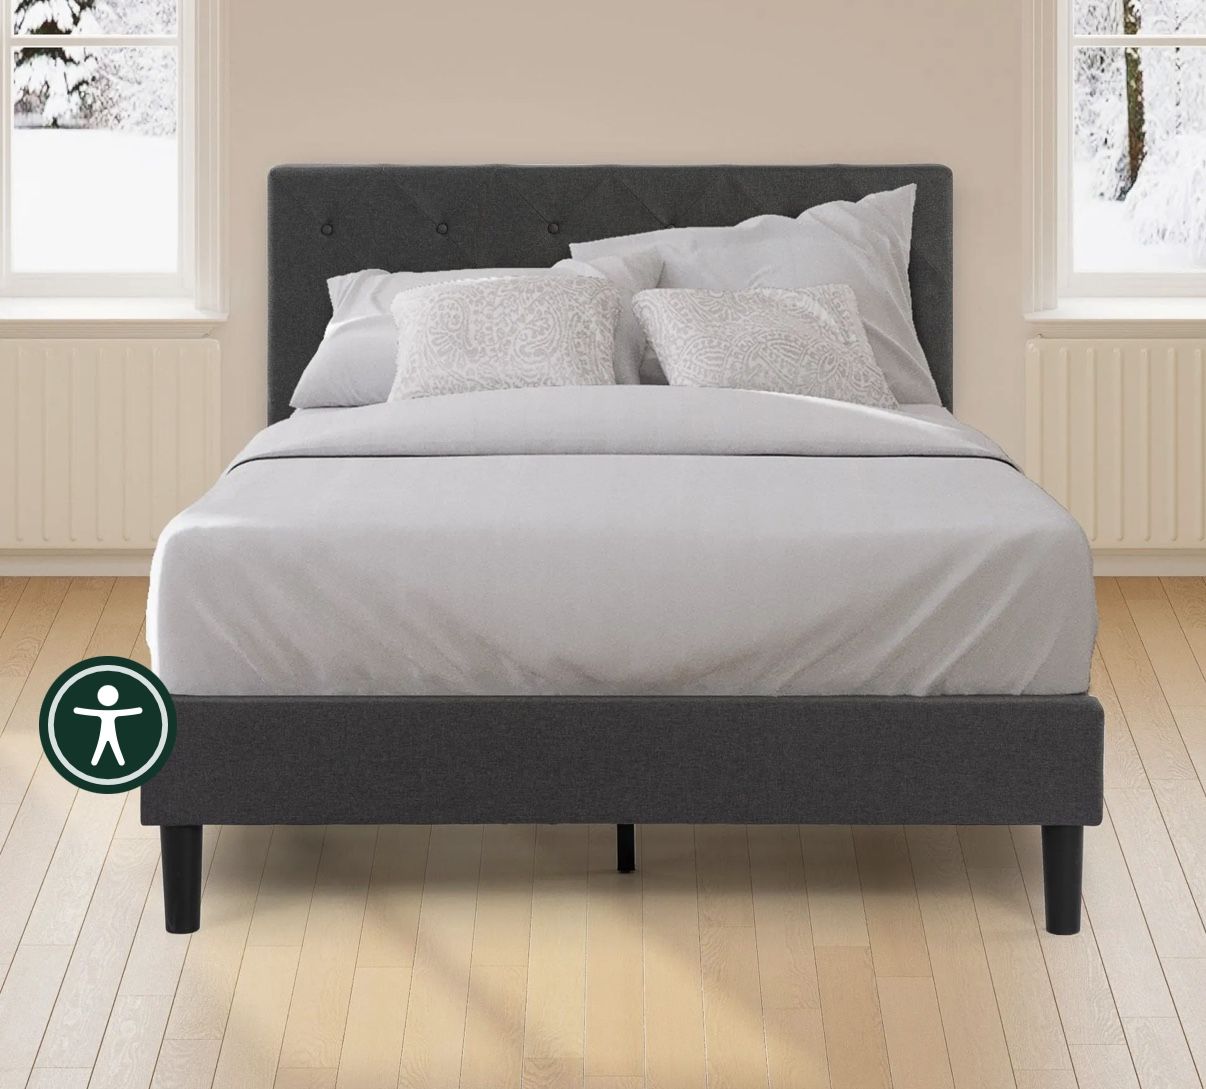 Full Bedframe With Mattress 